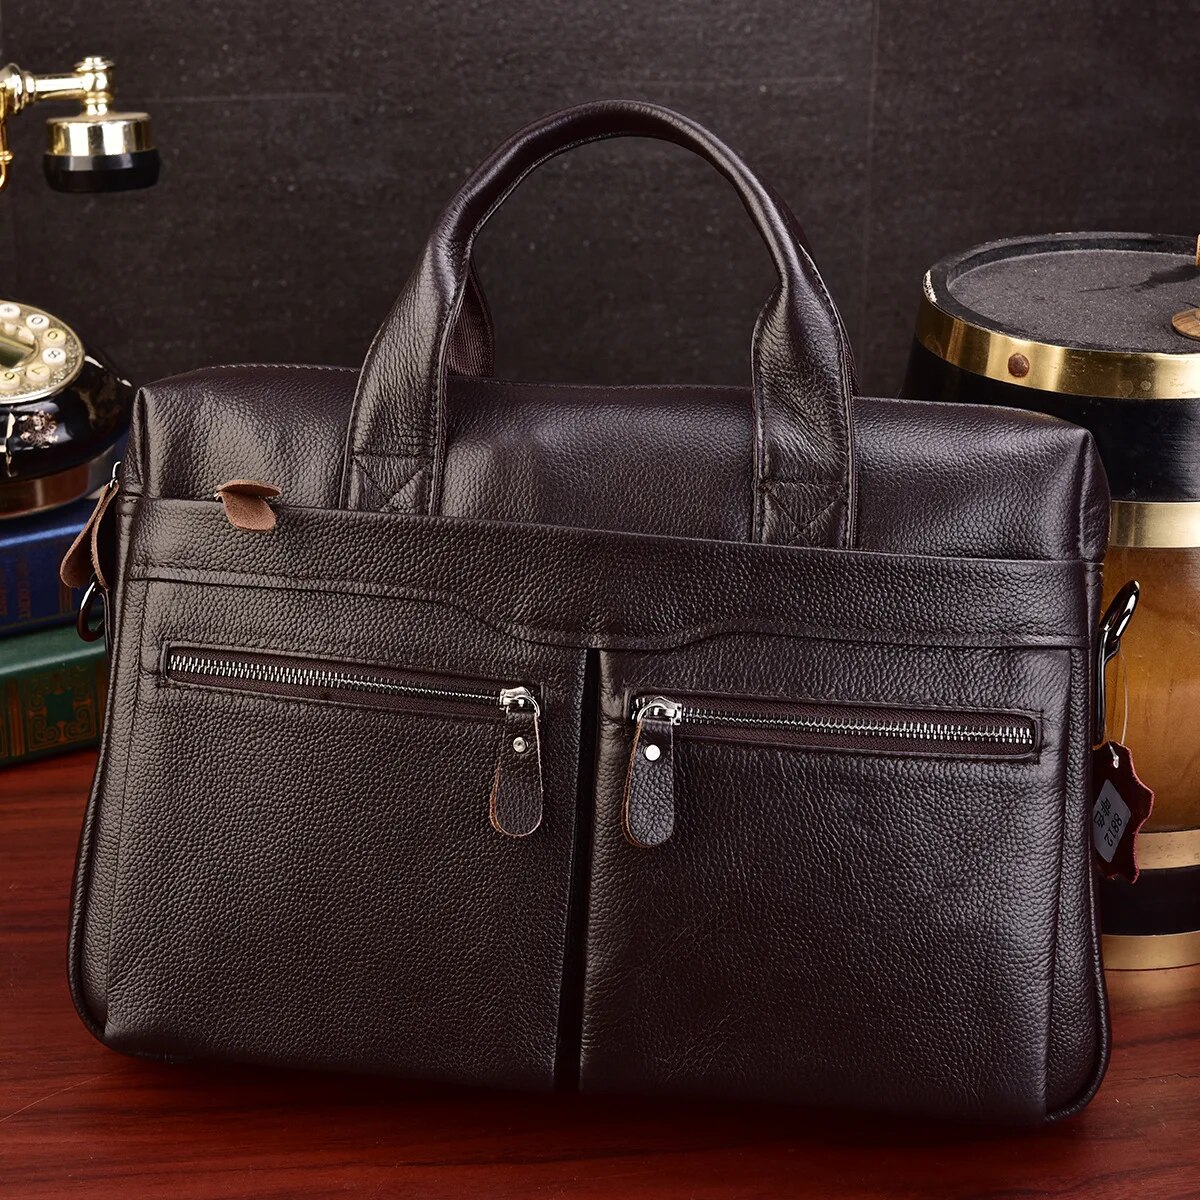 come4buy.com-Business Briefcases Men Cowhide Leather Fit 14'' ലാപ്‌ടോപ്പ് ബാഗ്